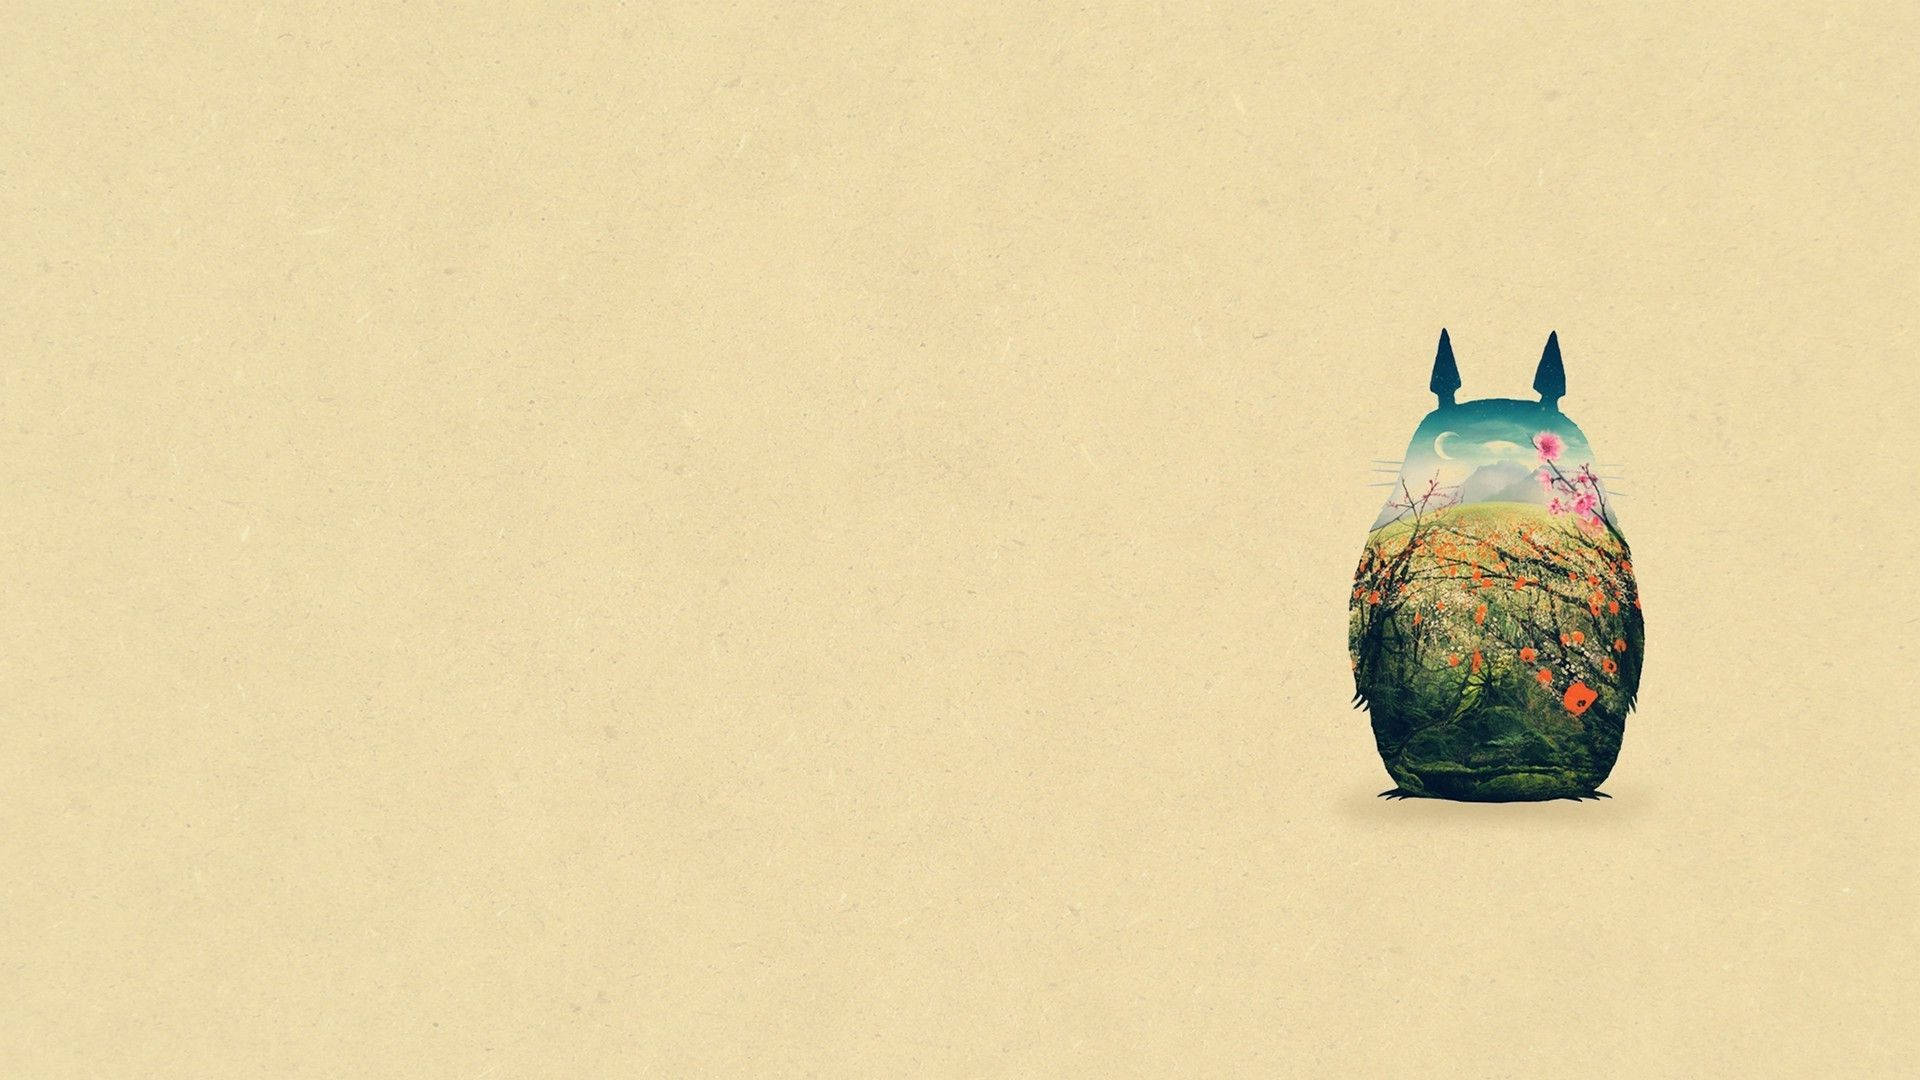 Totoro 1920X1080 Wallpaper and Background Image